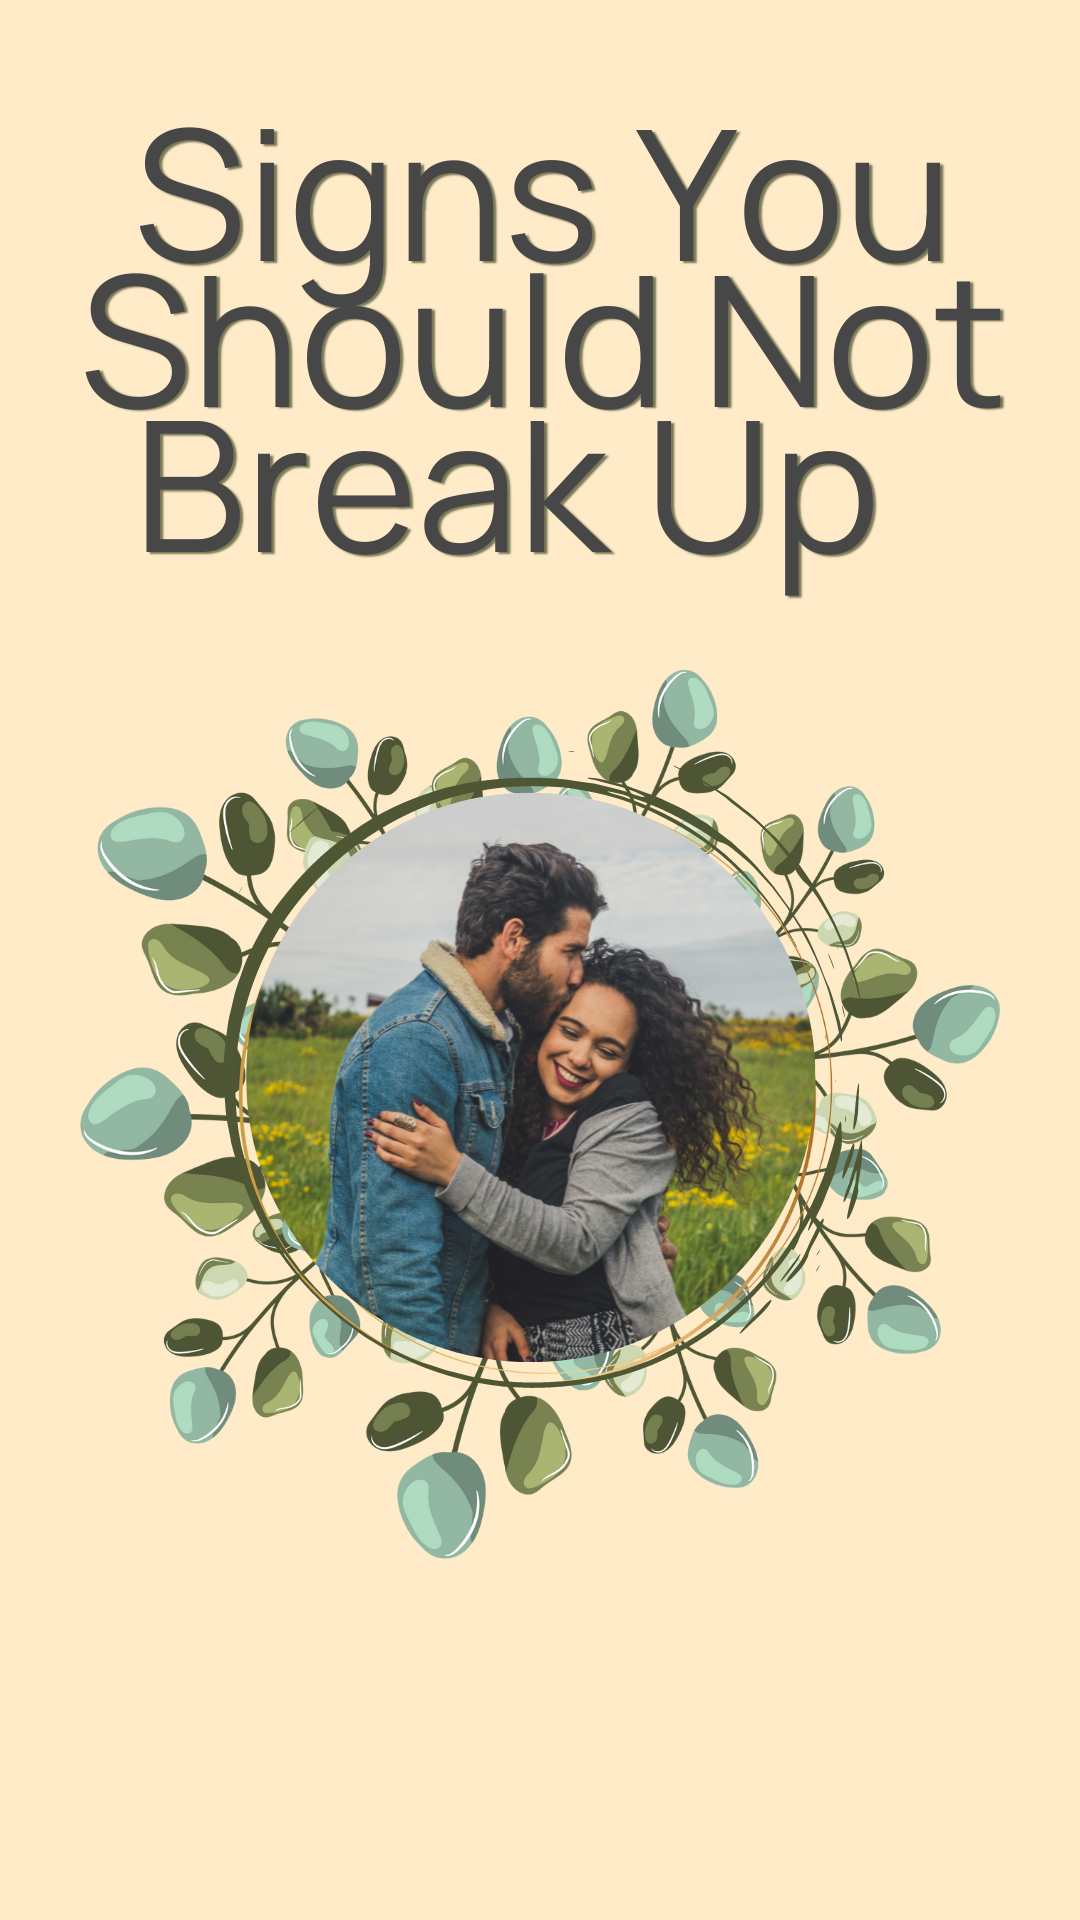 13 Signs You Should Not Break Up